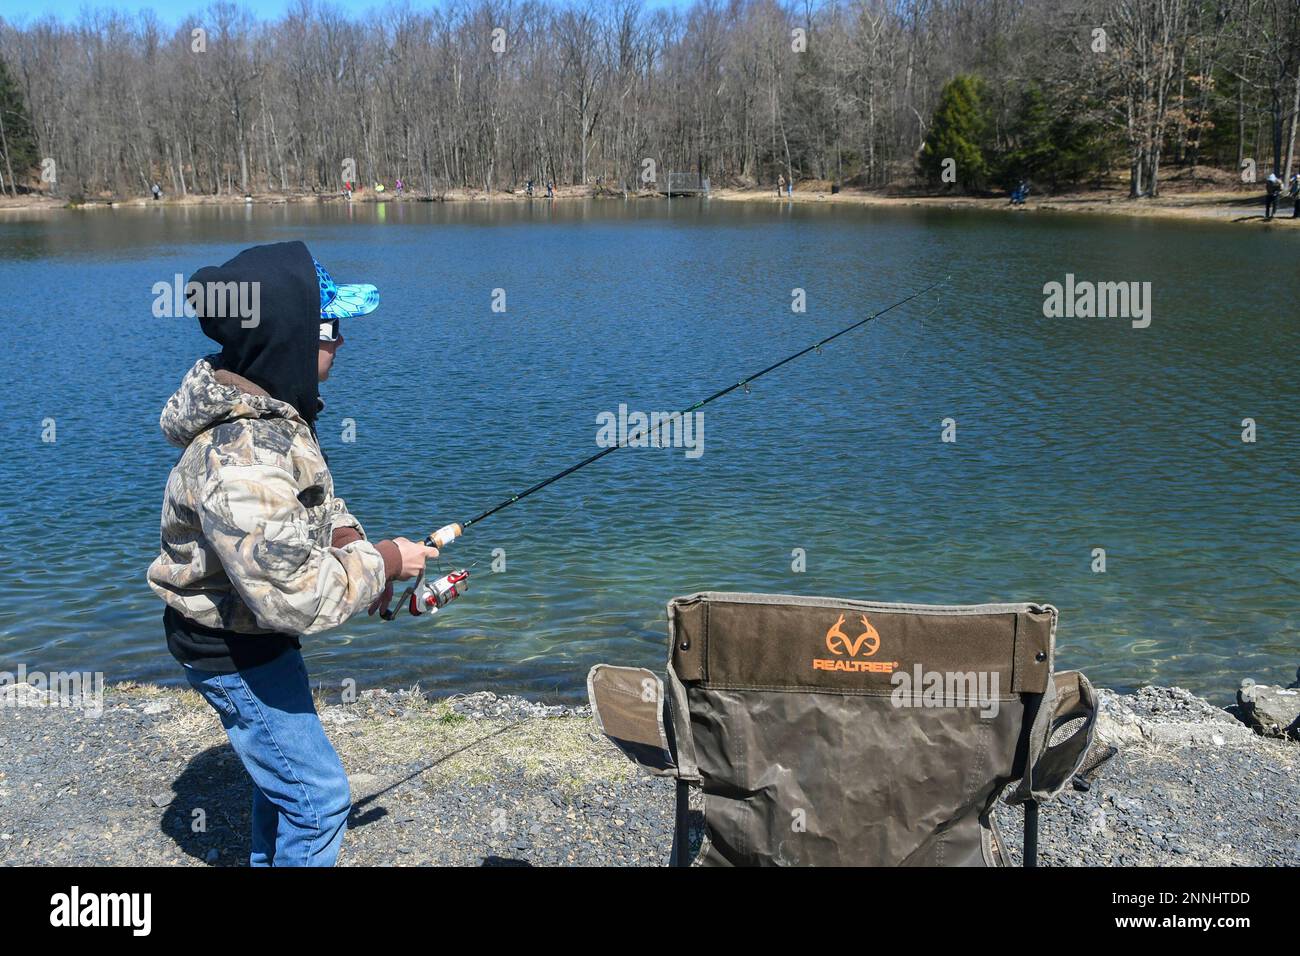 Colt Laudeman, of Minersville, Pa., reels in his line during the